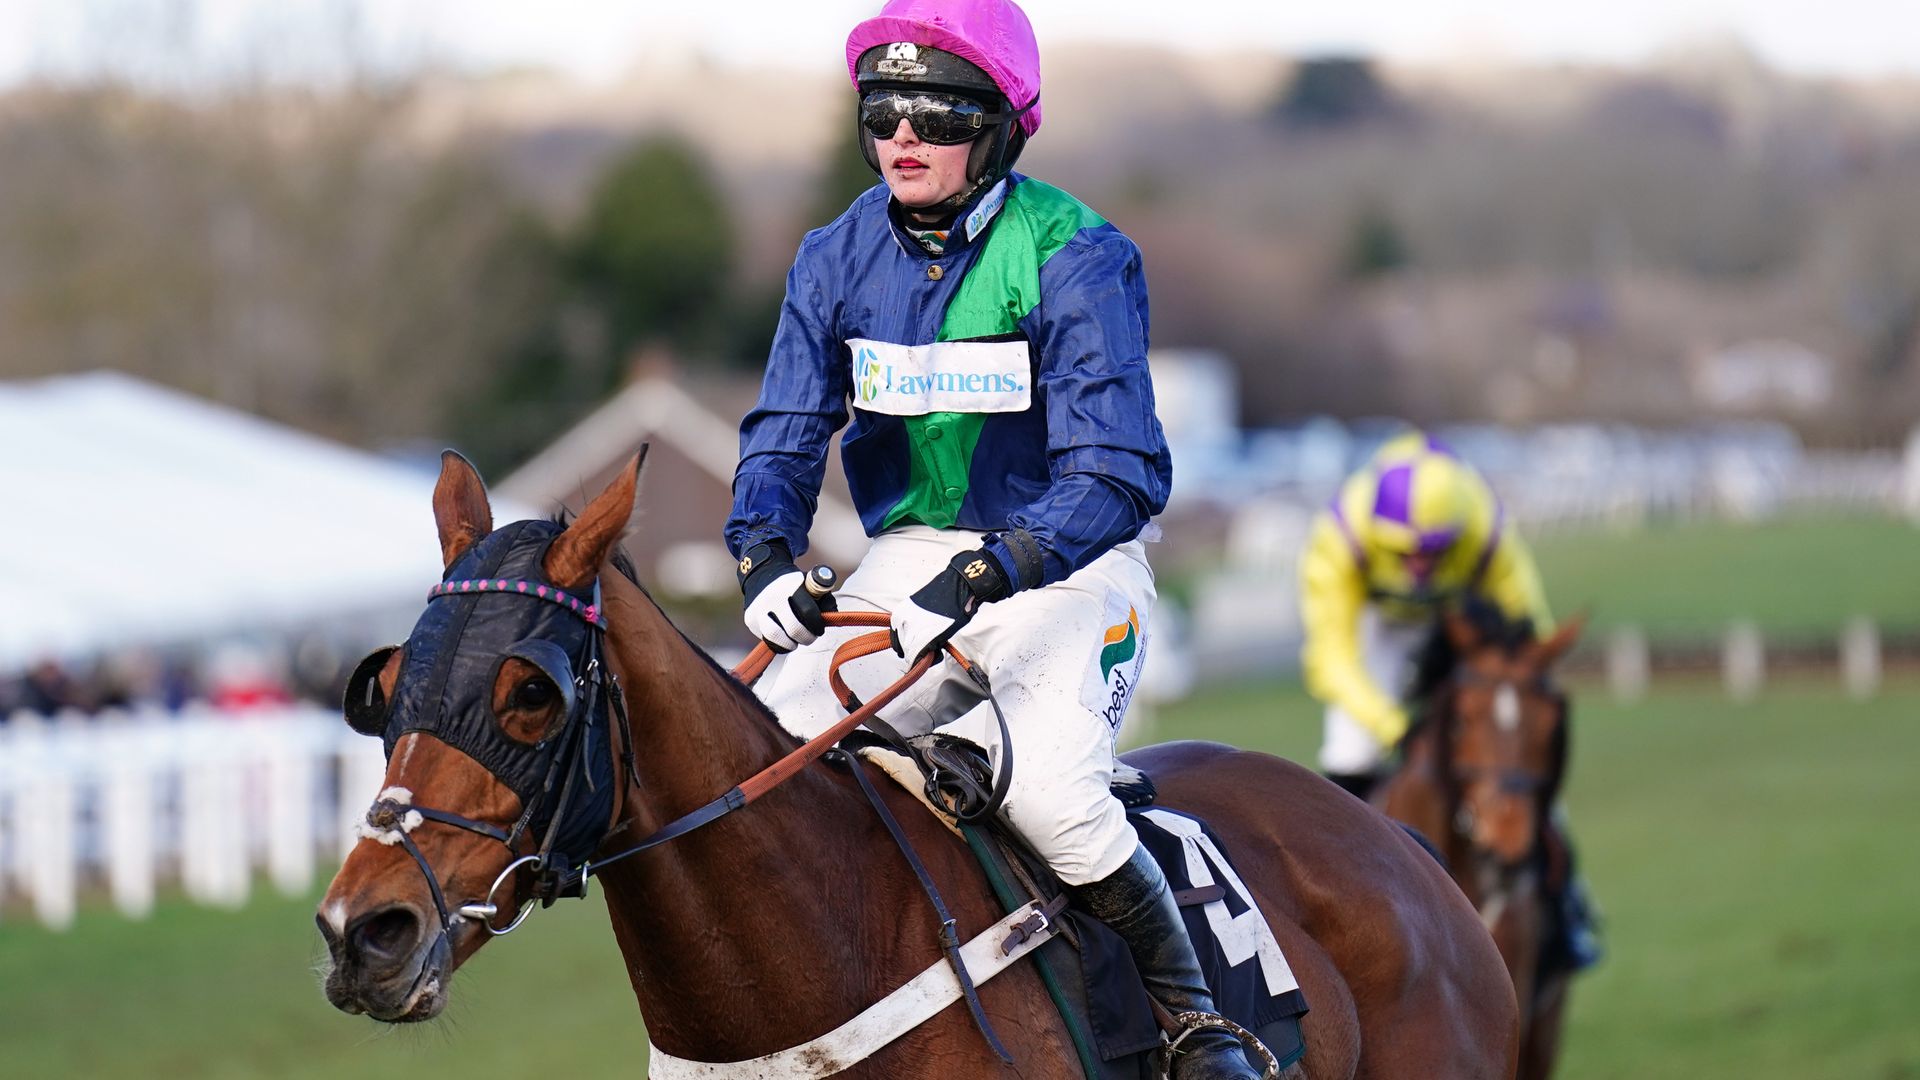 Sublime Heights heads 11-strong field at Plumpton